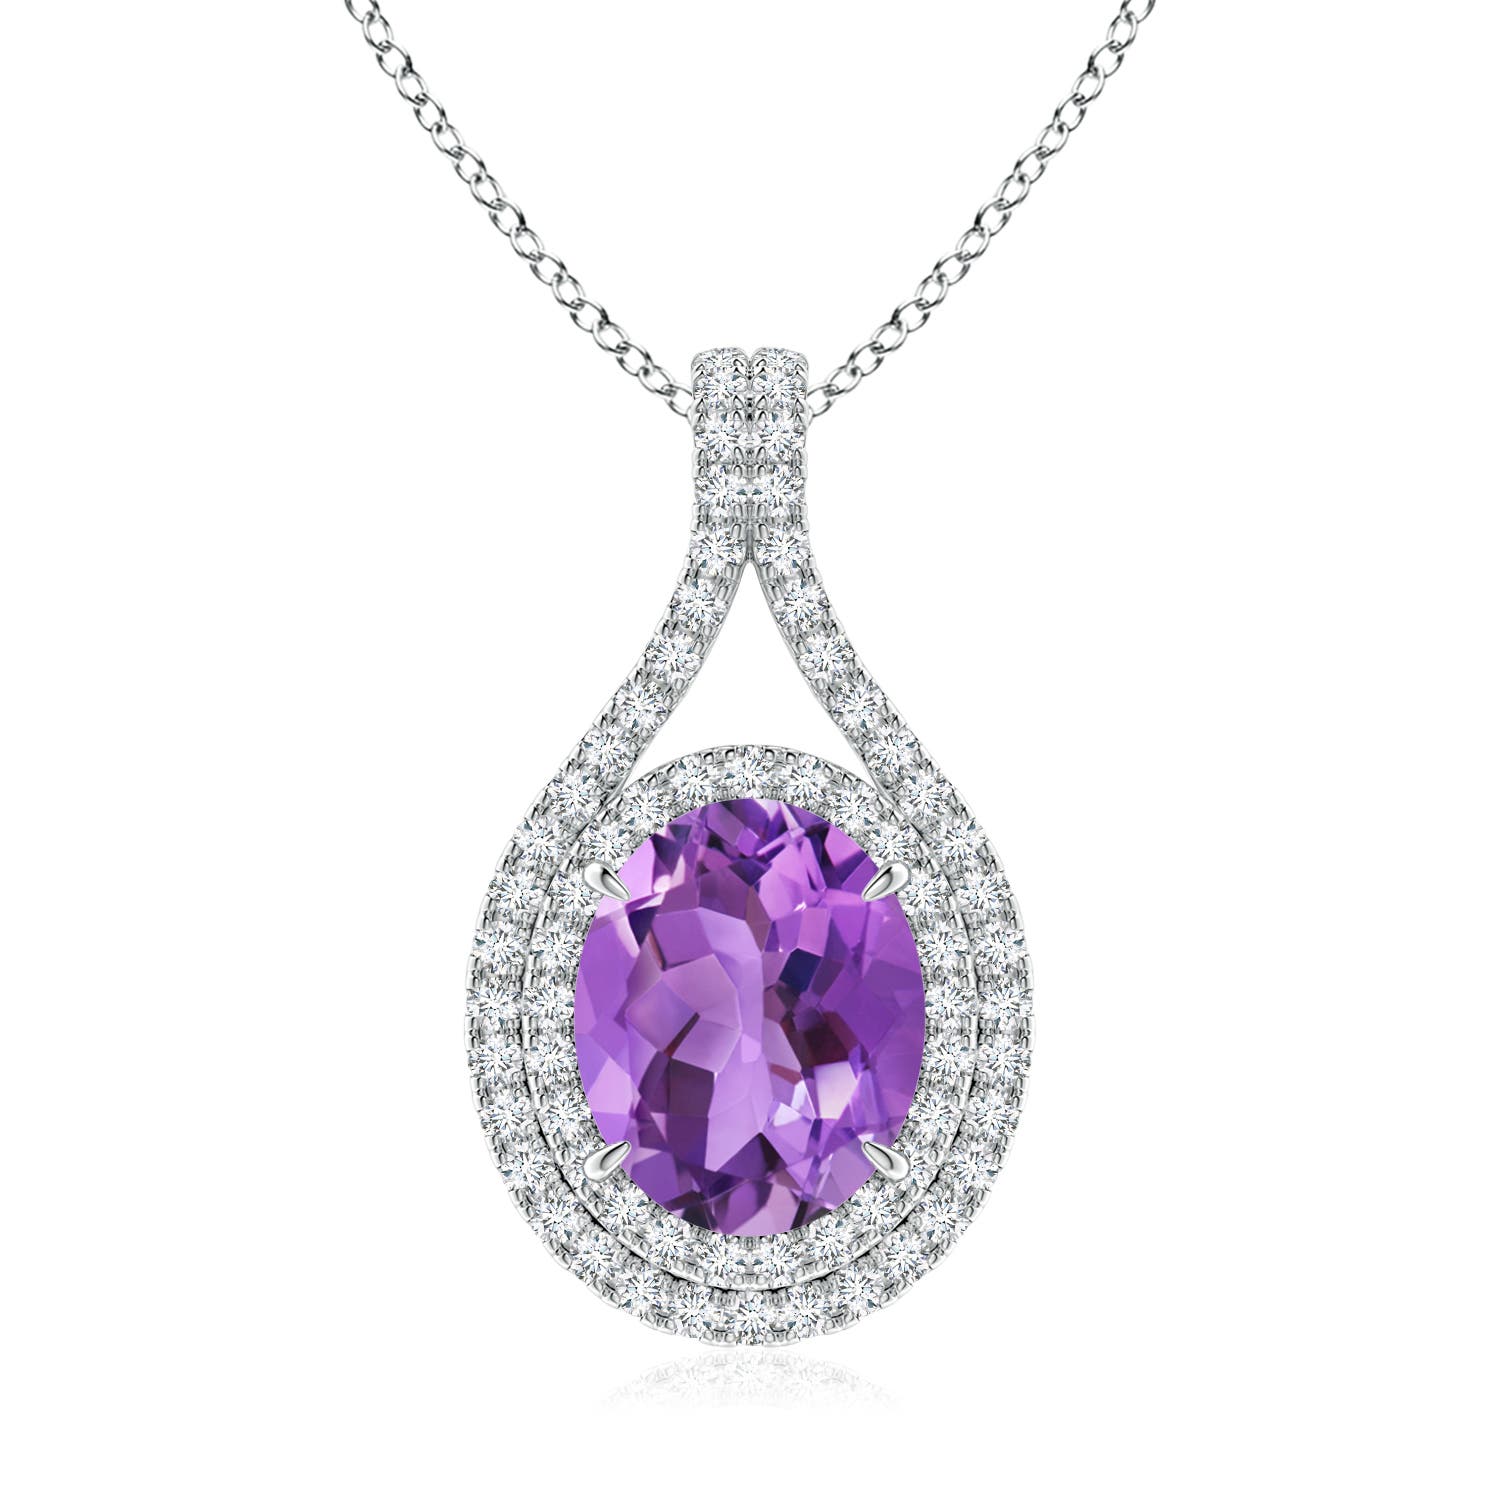 AA - Amethyst / 2.75 CT / 14 KT White Gold